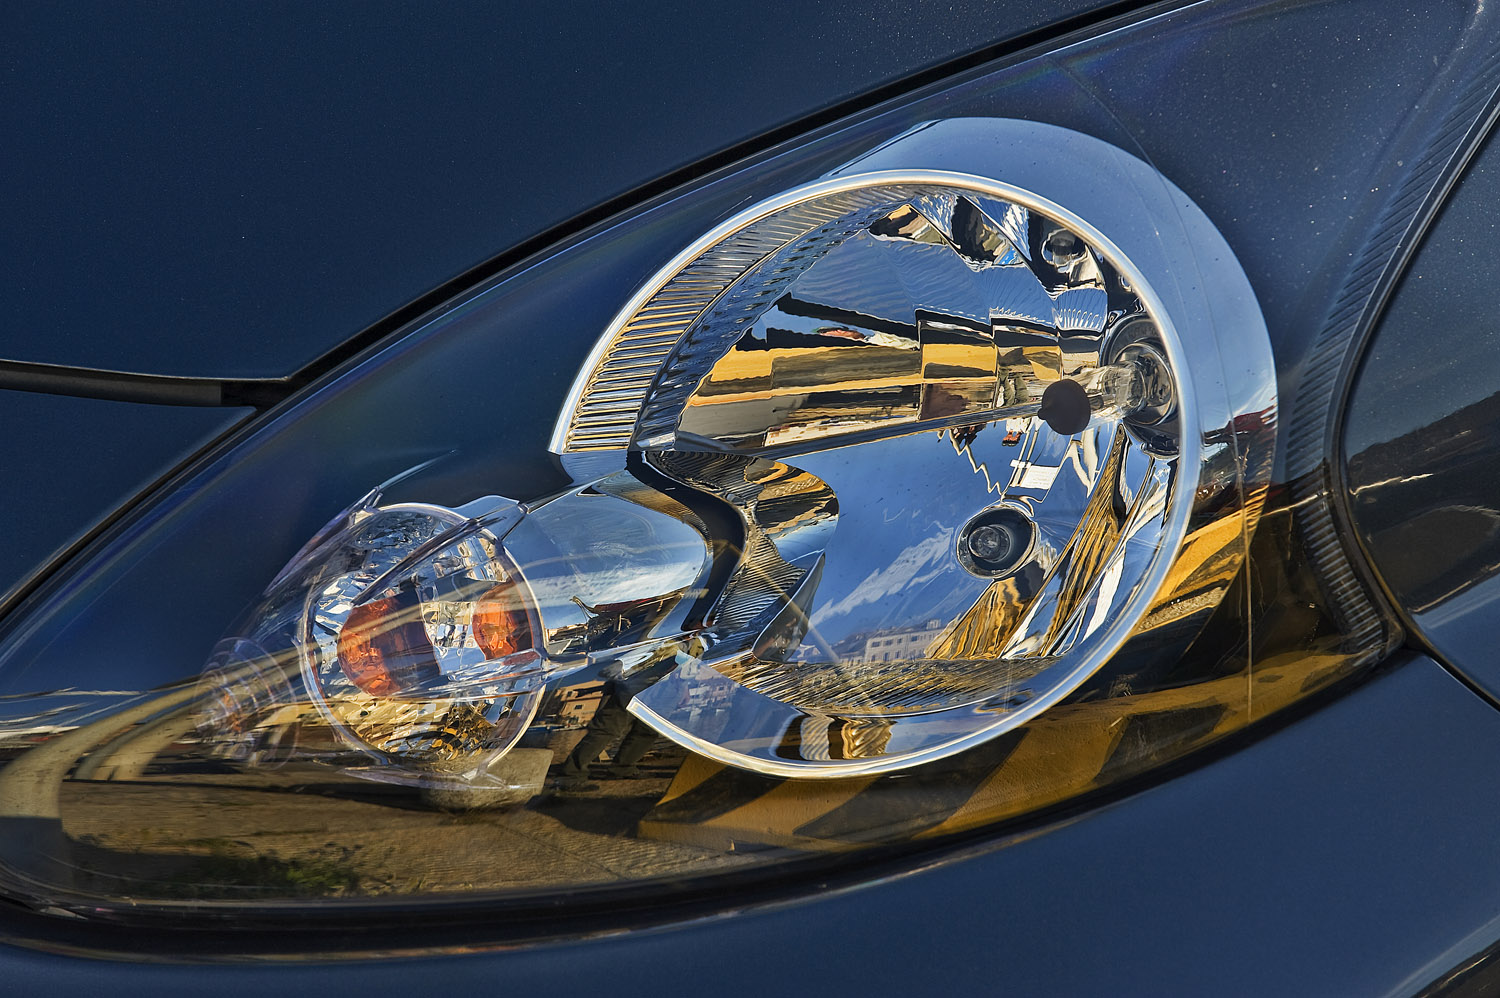 reflections in a car's headlight